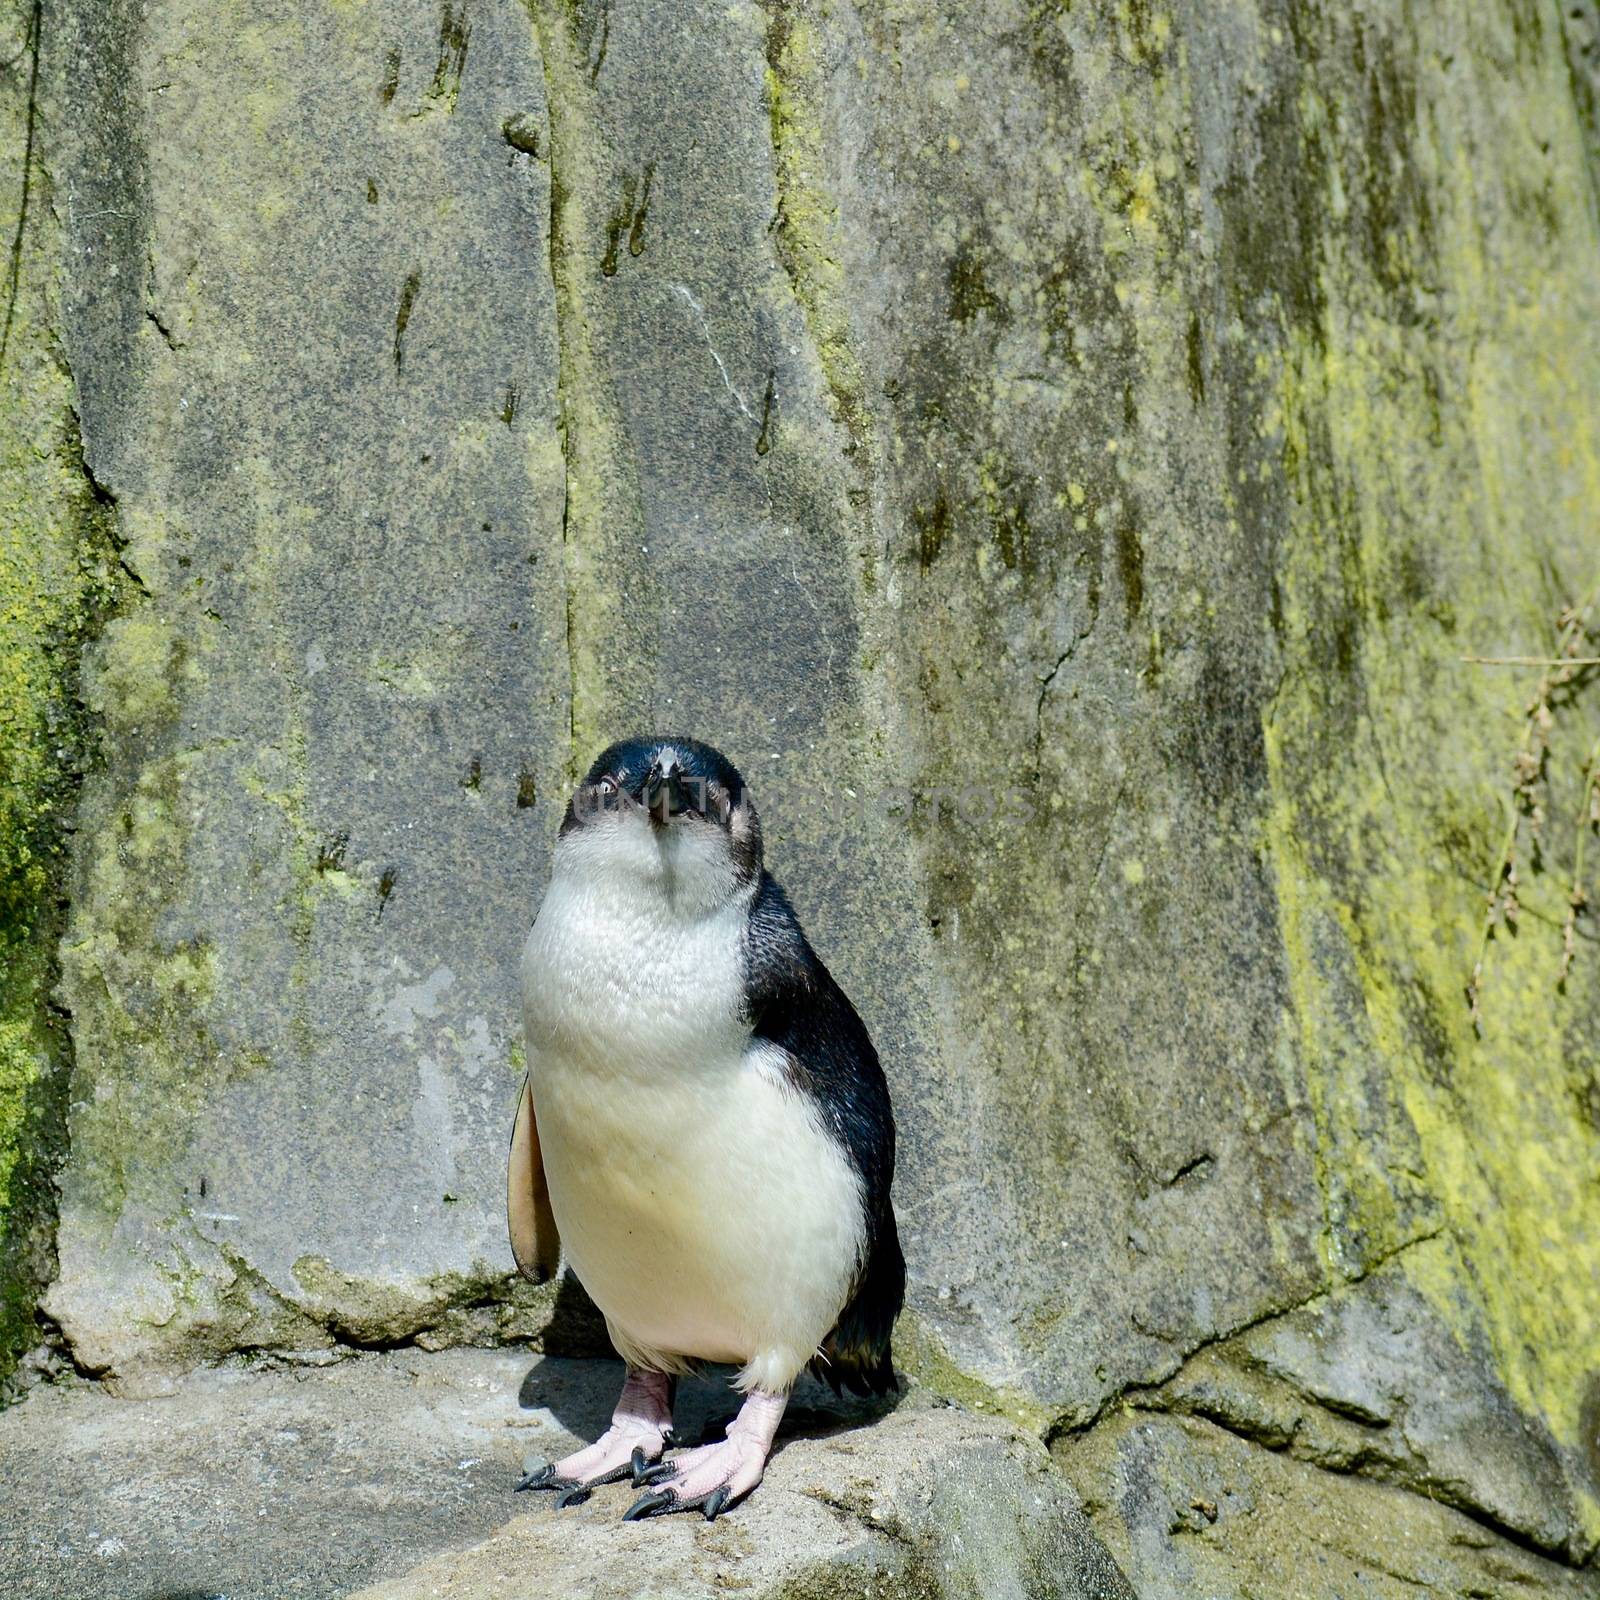 Little Penguin (Eudyptula minor). These are the smallest of the penguins, inhabiting the coastlines of Southern Australia and New Zealand. Penguins resqued from fishing nets, with lost wings. by Marshalkina